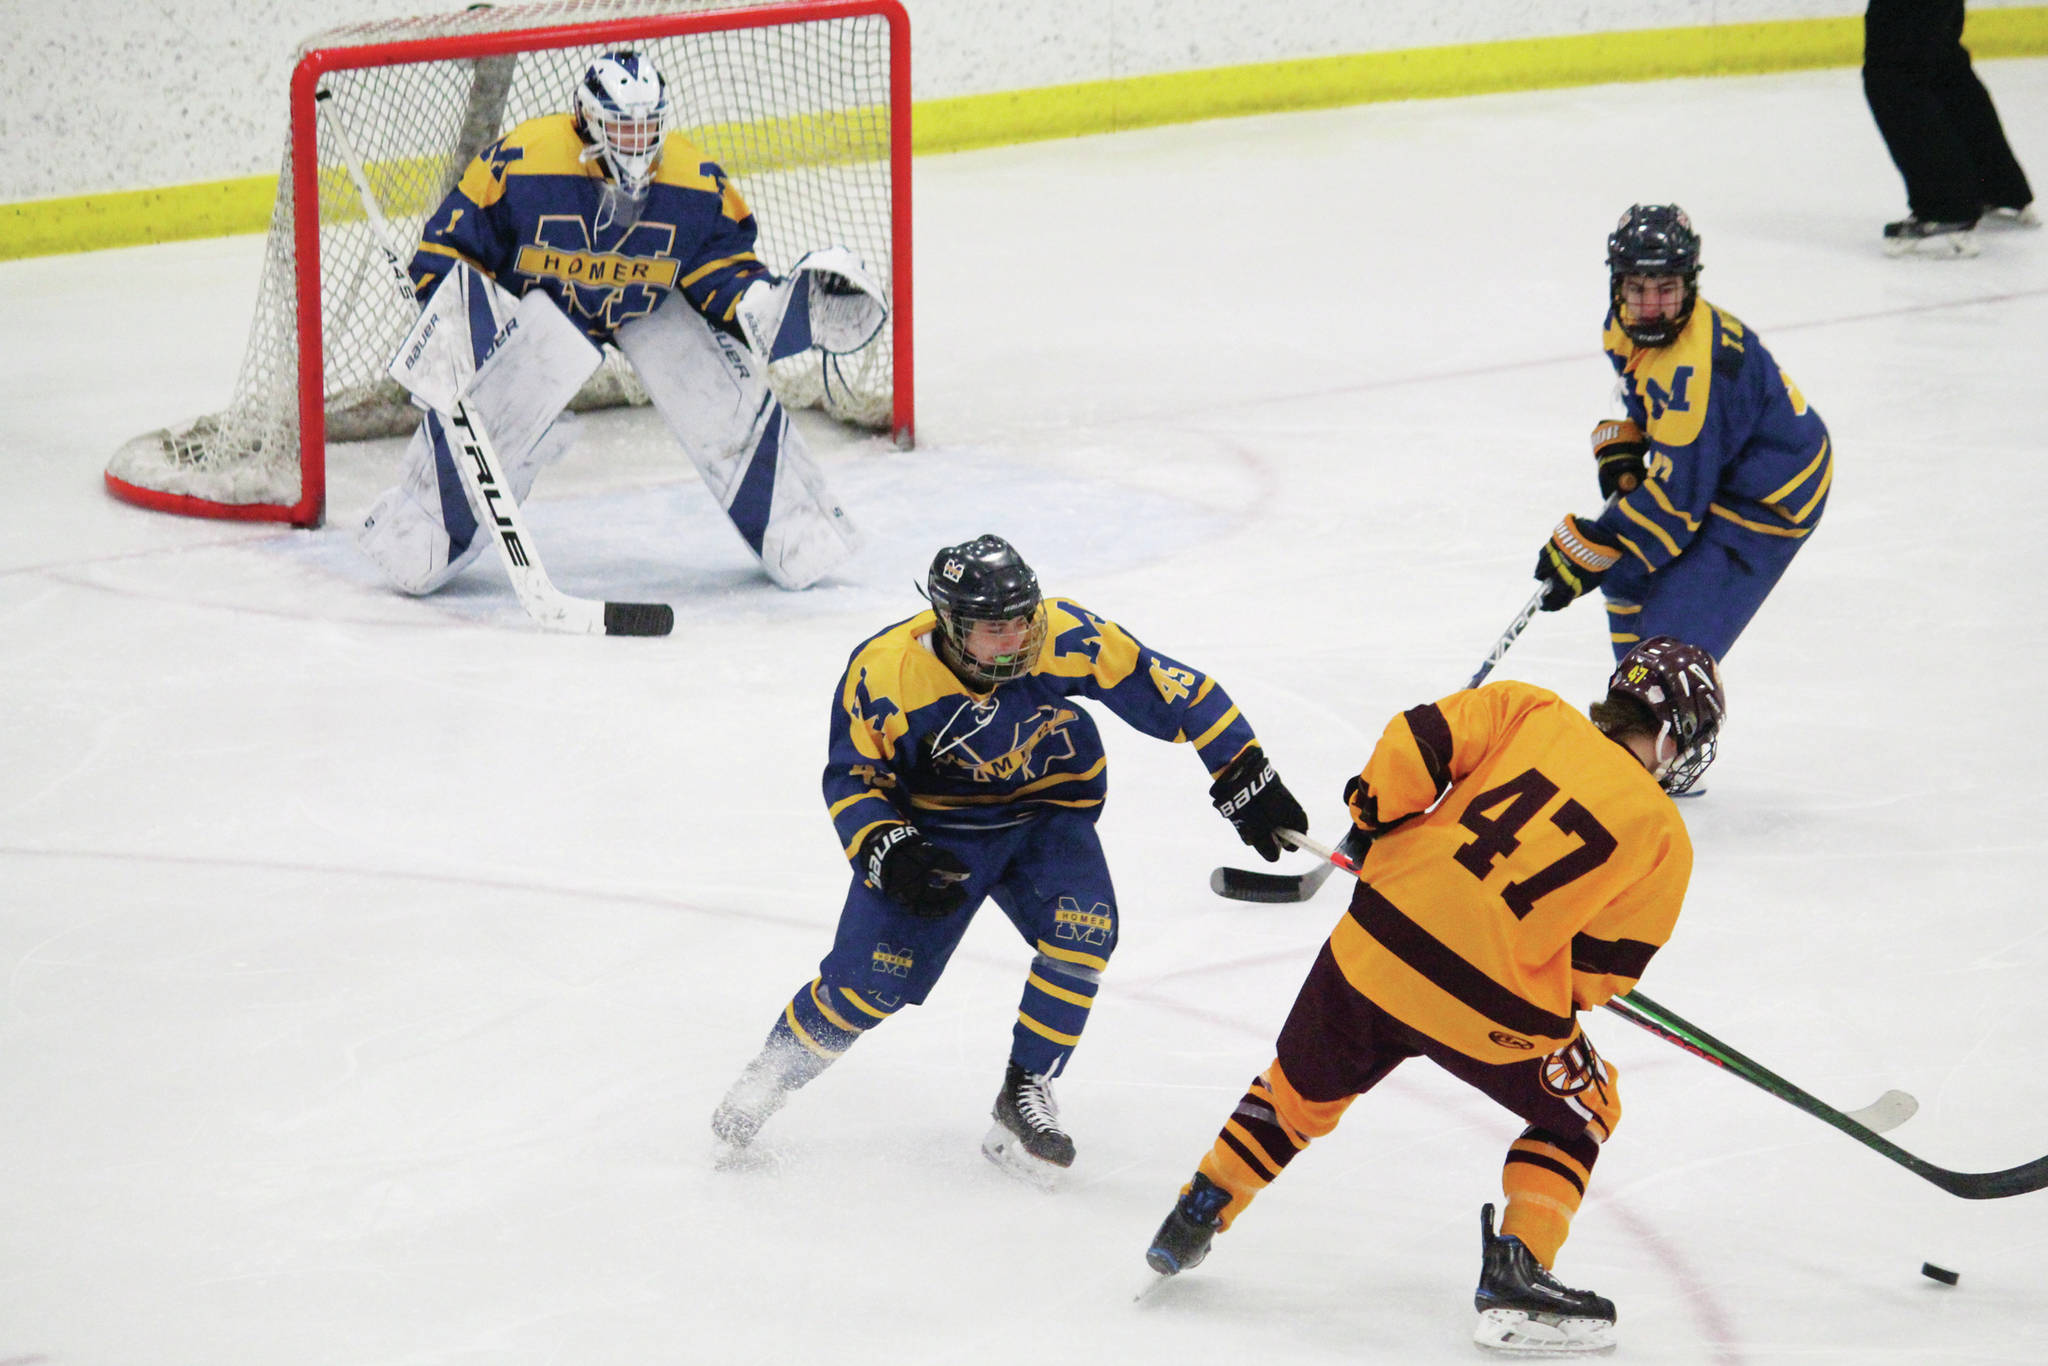 Homer’s Bergen Knutson (left) and Toby Nevak (right) try to fend off Dimond’s Kaden Daniels during a Friday, Feb. 14, 2020 game at the 2020 ASAA First National Cup Division I Hockey State Championship at the Curtis D. Menard Memorial Sports Center in Wasilla, Alaska. (Photo by Megan Pacer/Homer News)